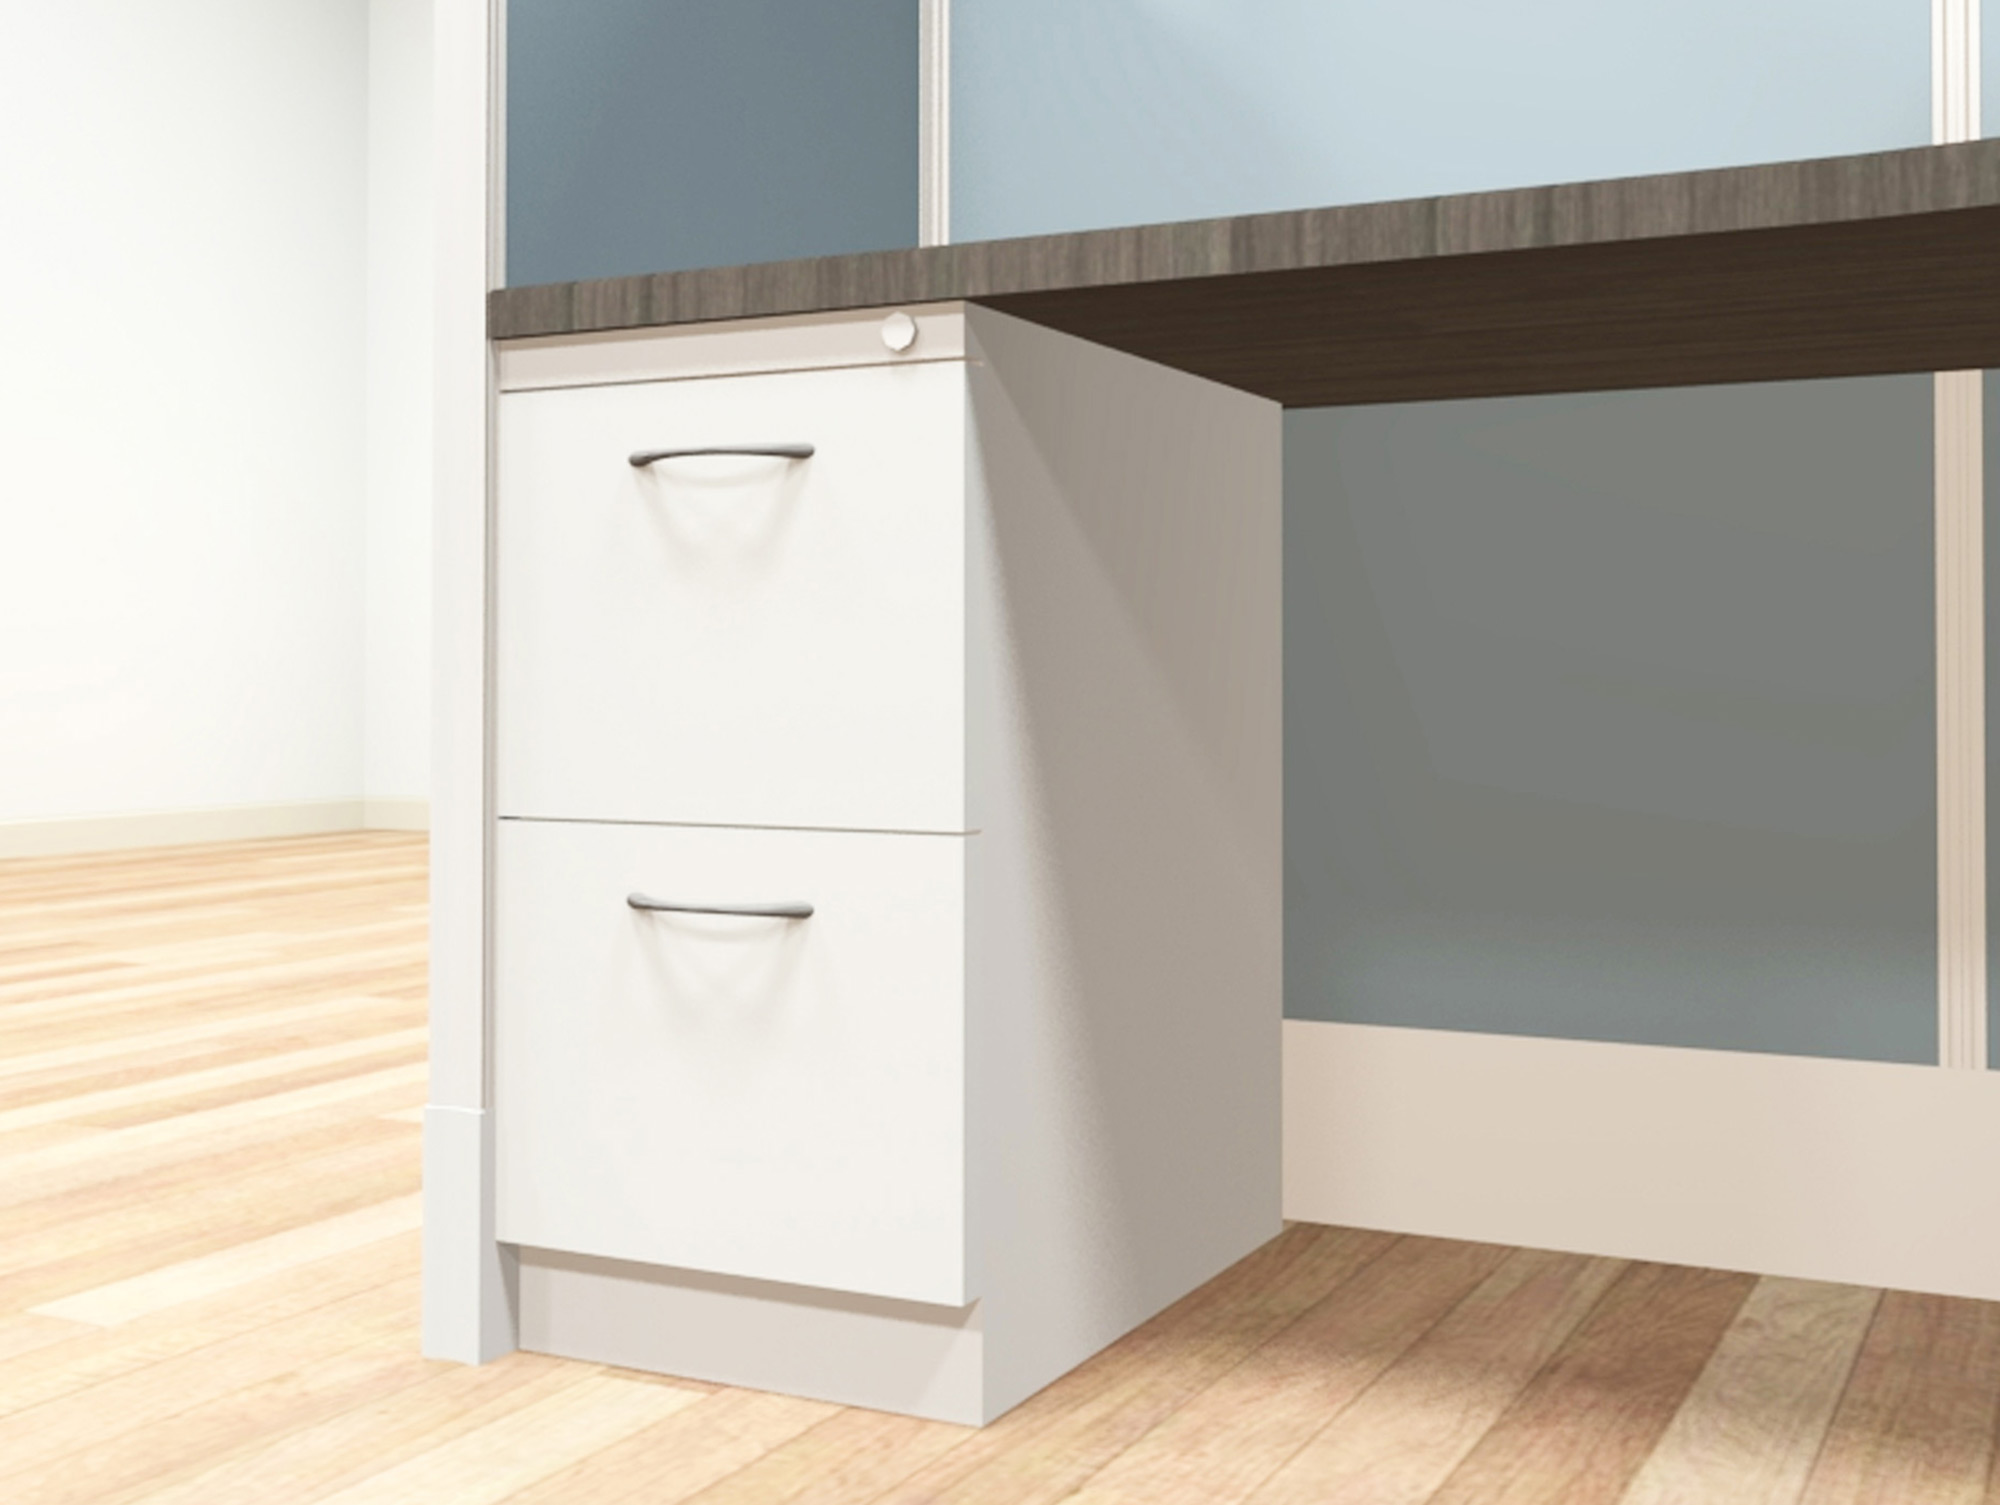 8x12 modular workstations from AIS - a ï¿½file-fileï¿½ pedestal is an under-surface storage cabinet with two deep drawers designed for hanging files. Lock and key secures all drawers from unwanted visitors.